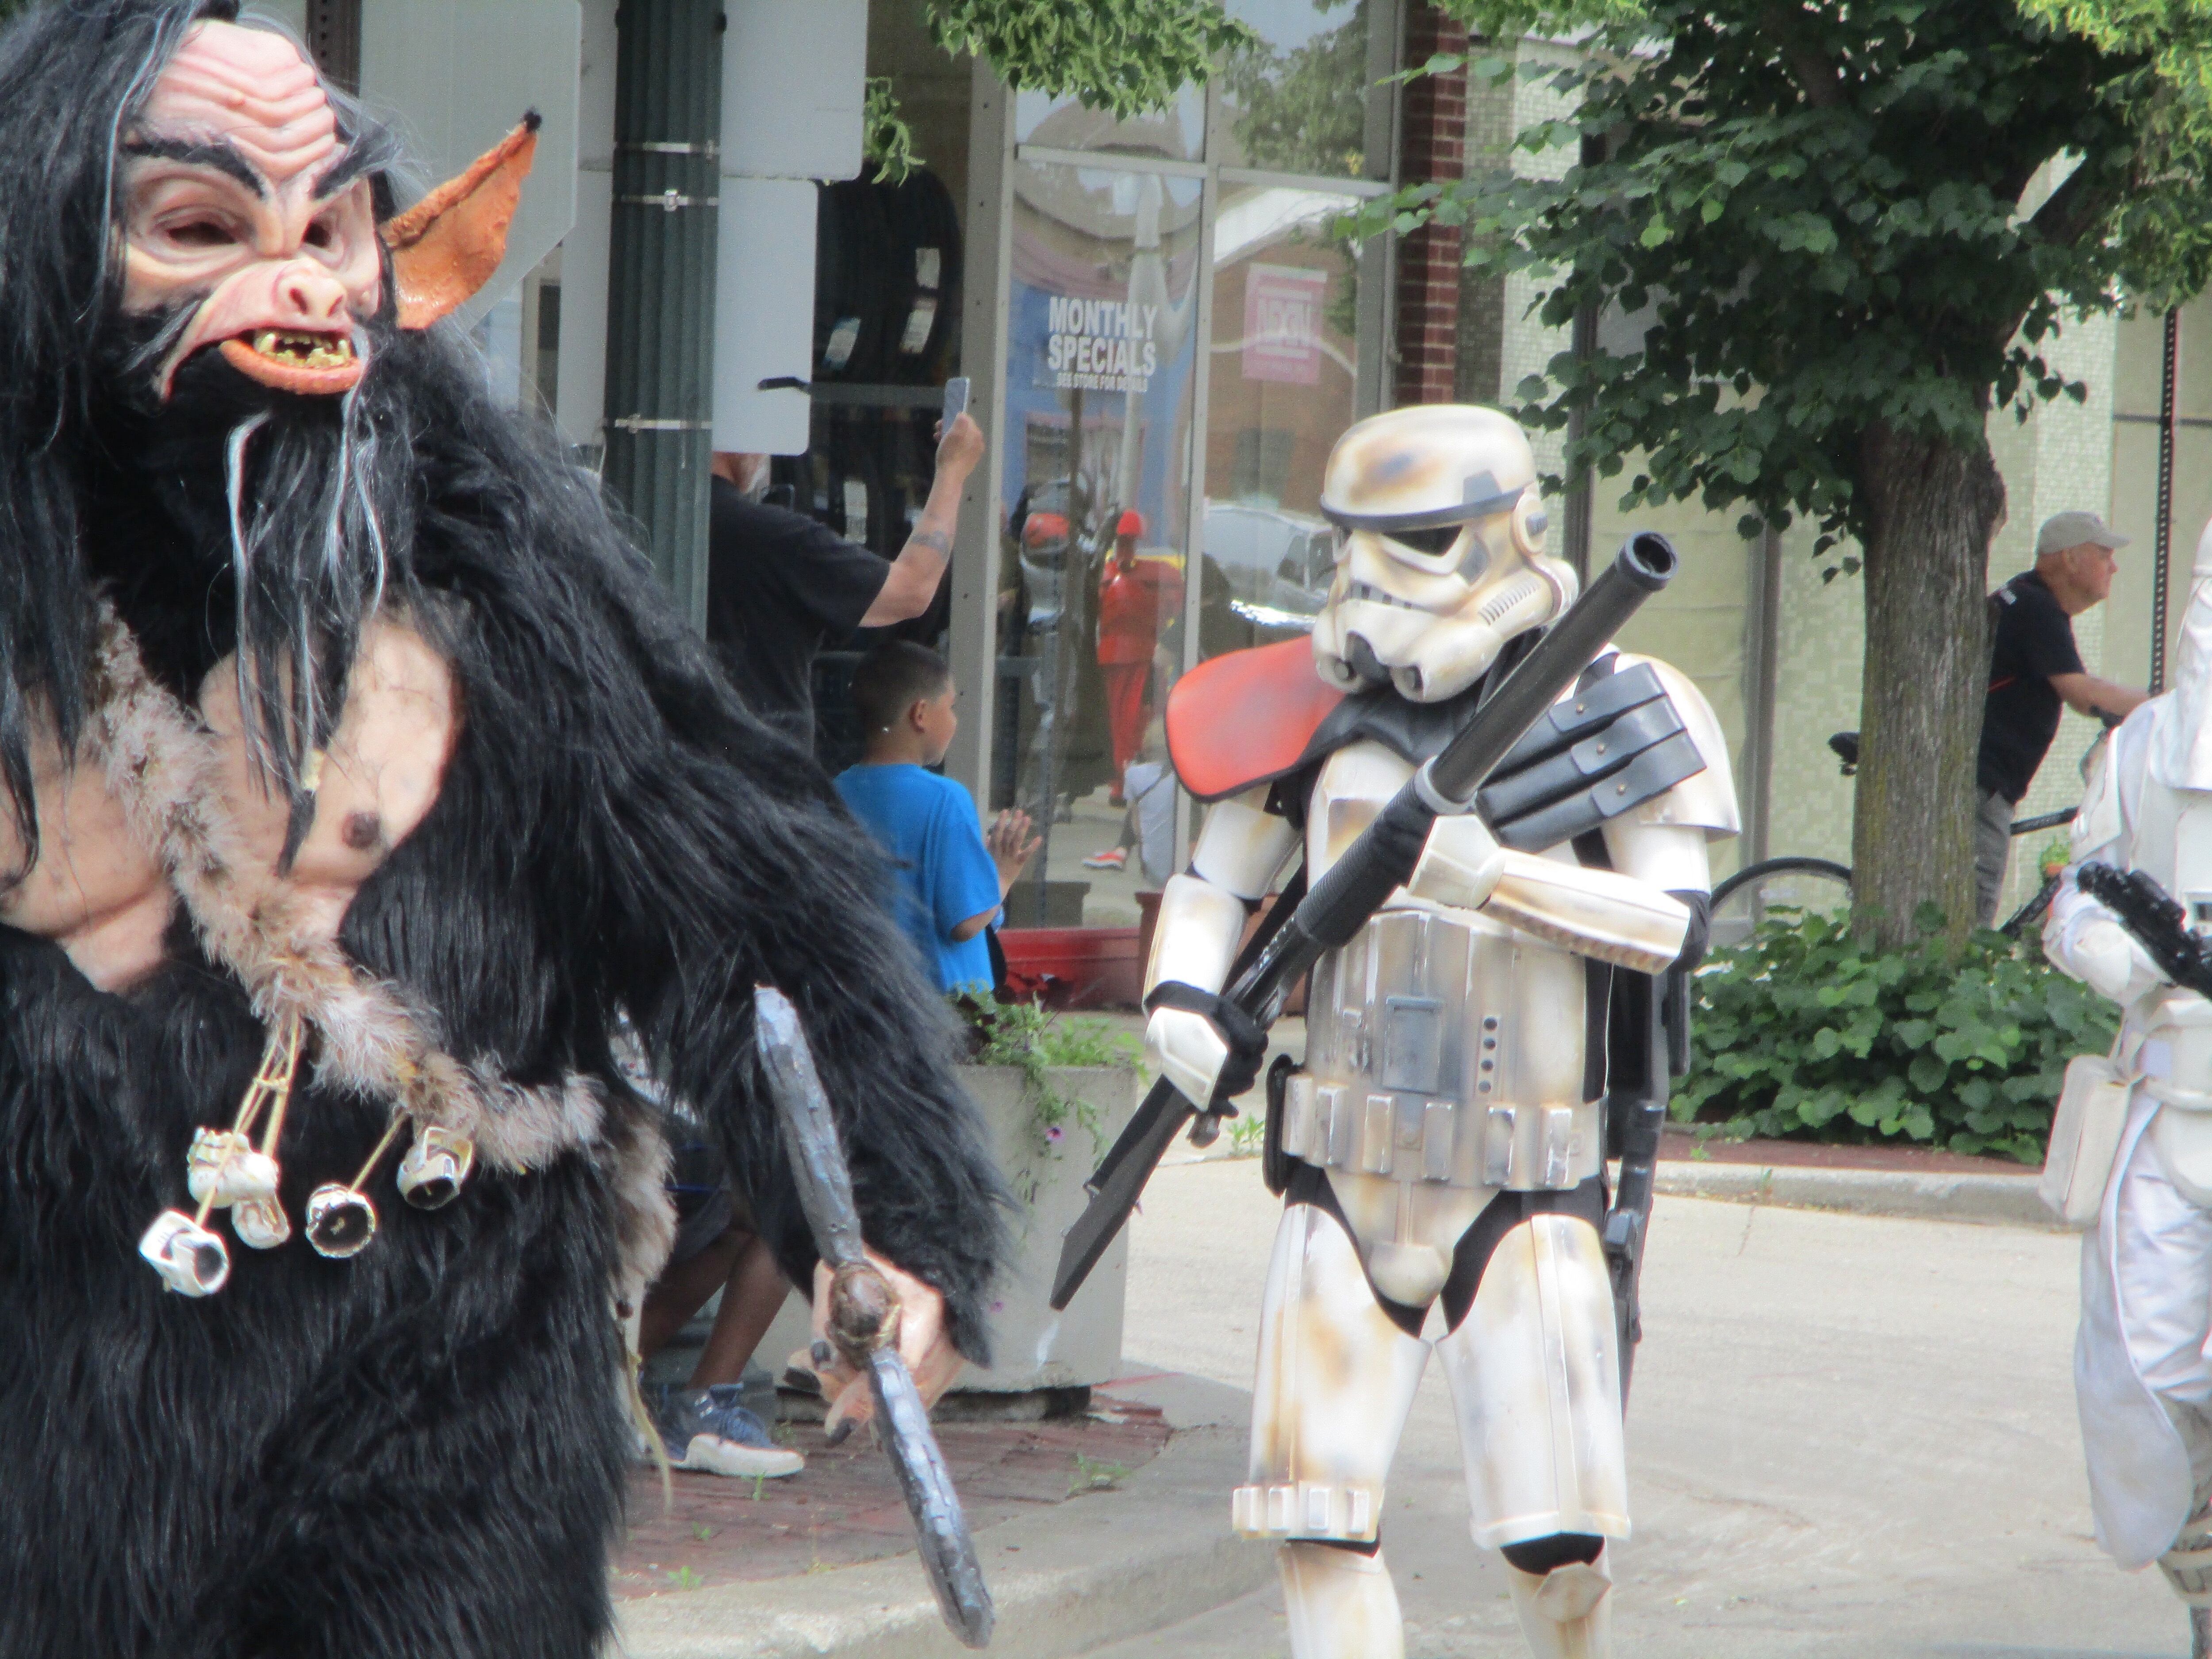 Star Wars Day costumers march in the opening parade for the event in downtown Joliet on Saturday, June 4, 2022.